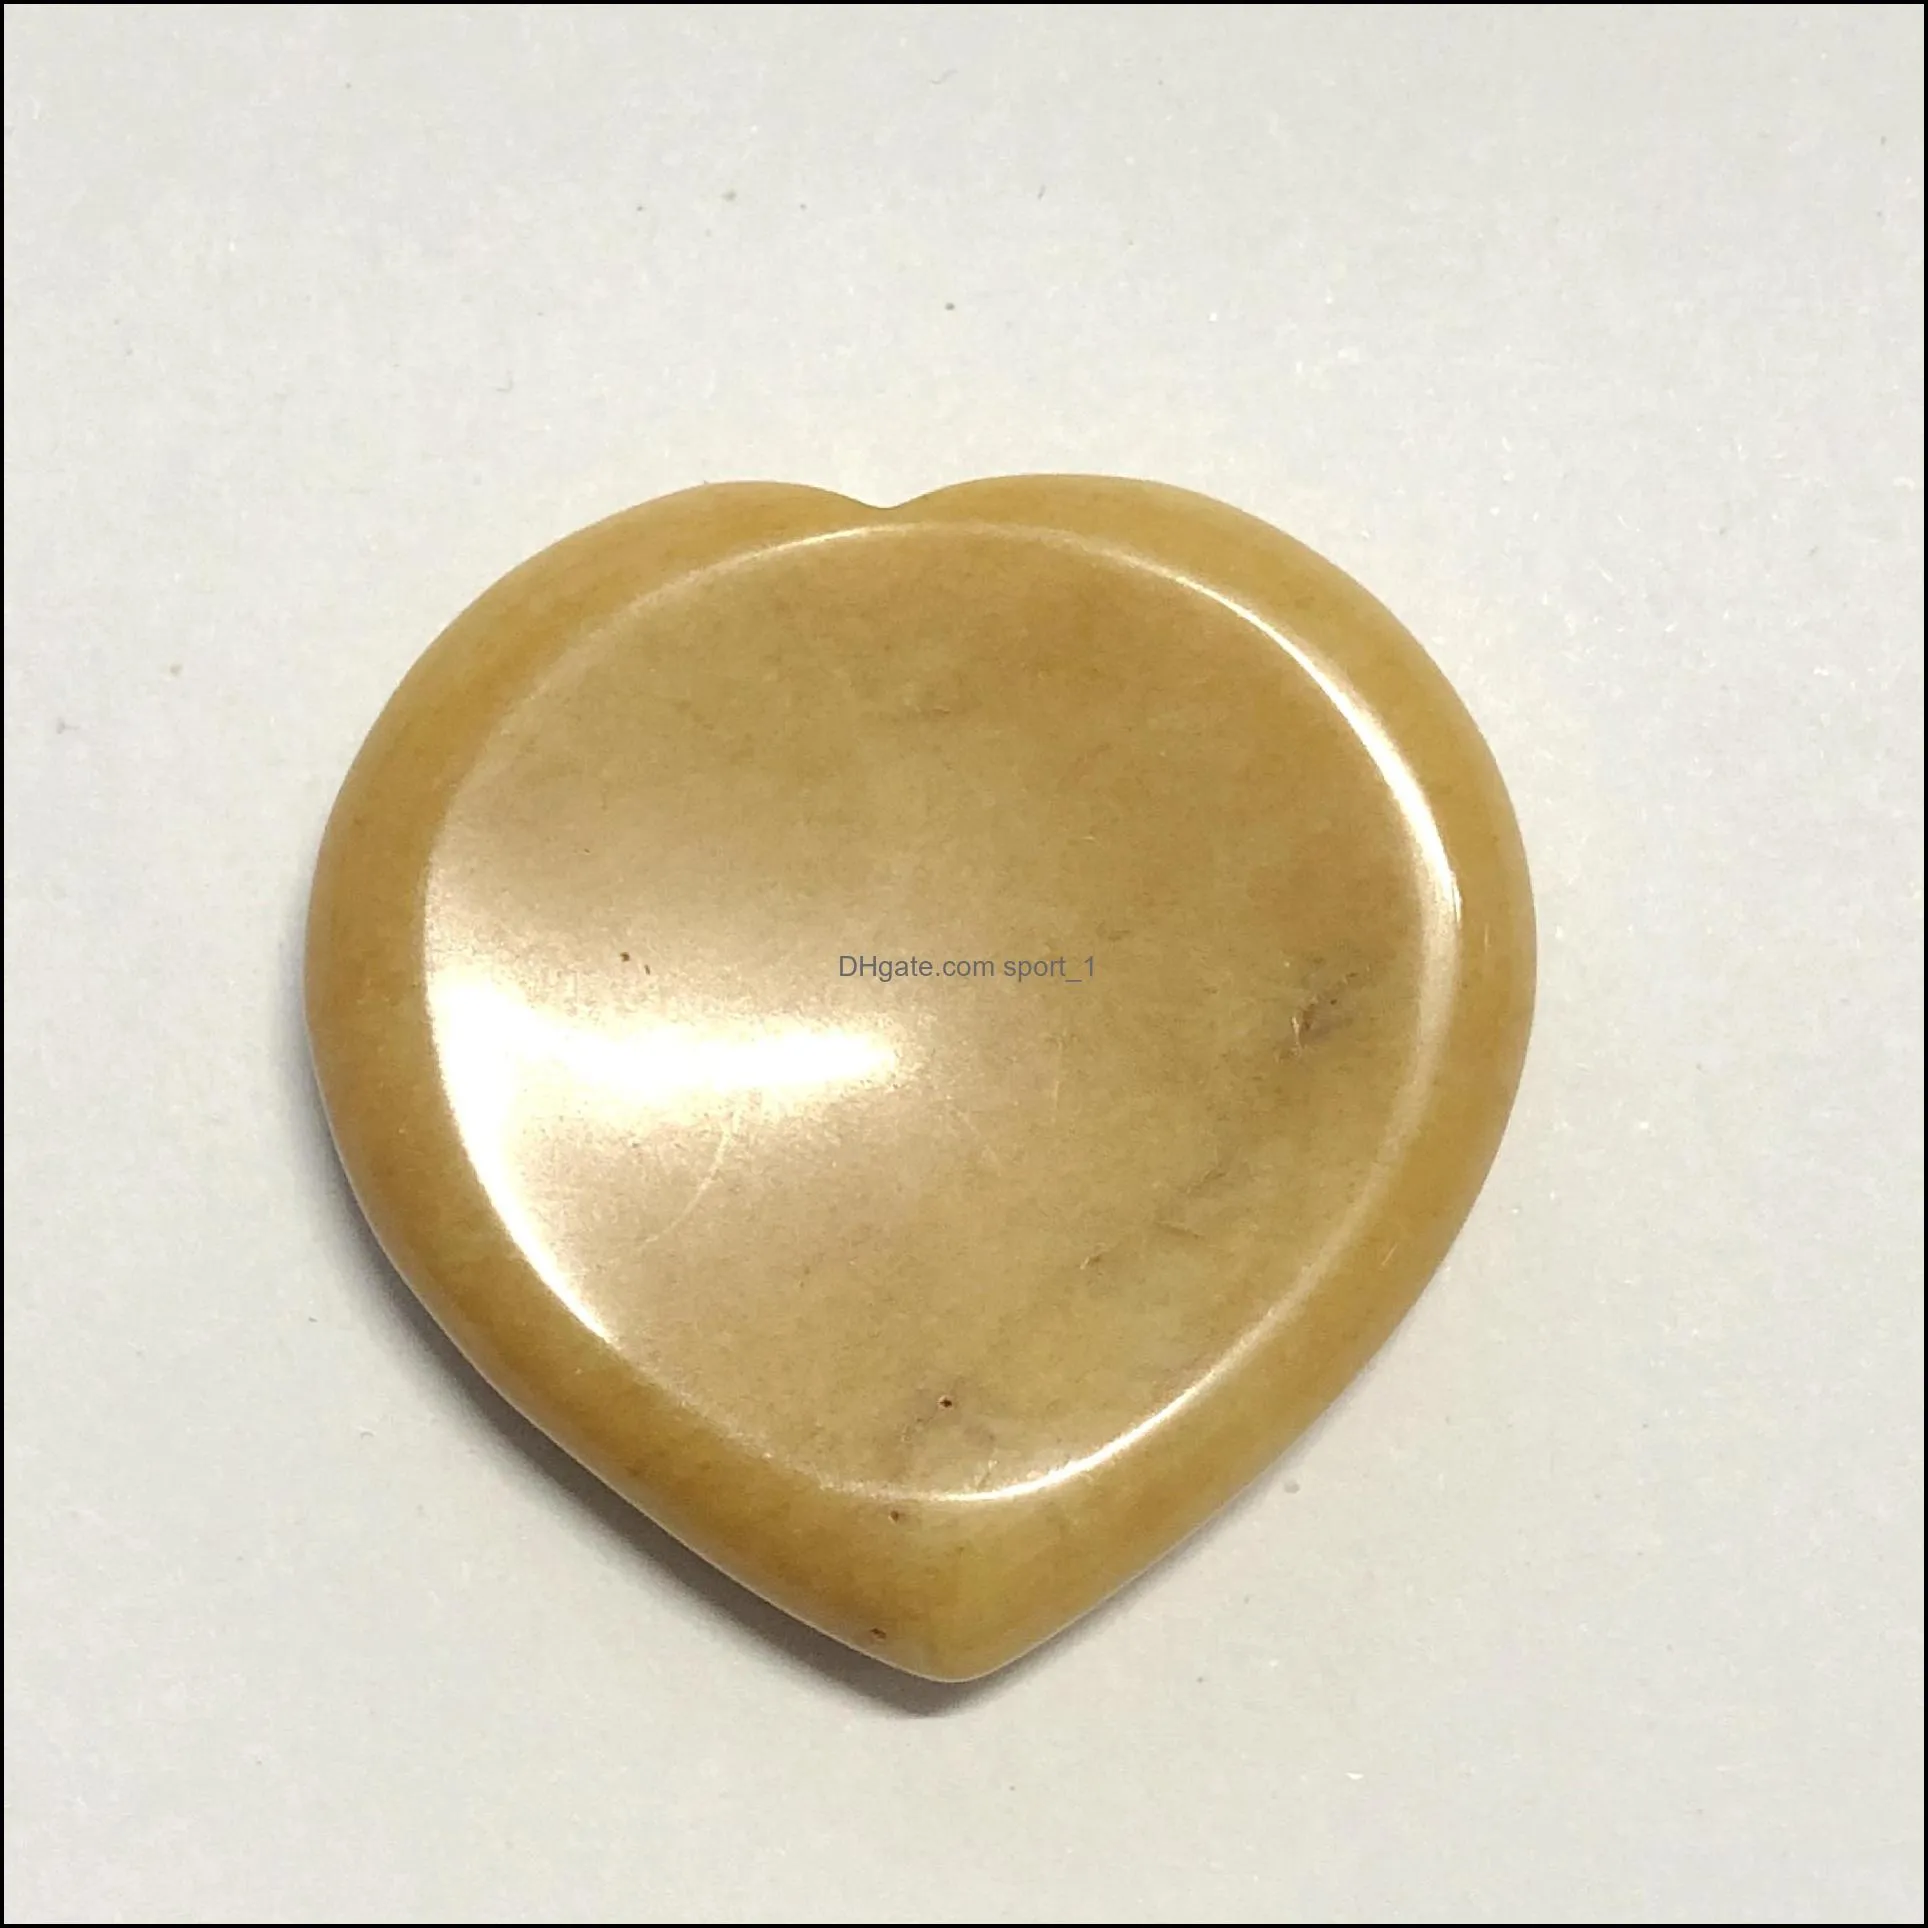 40*7mm heart worry stone thumb gemstone natural healing crystals therapy reiki treatment spiritual minerals massage palm gem